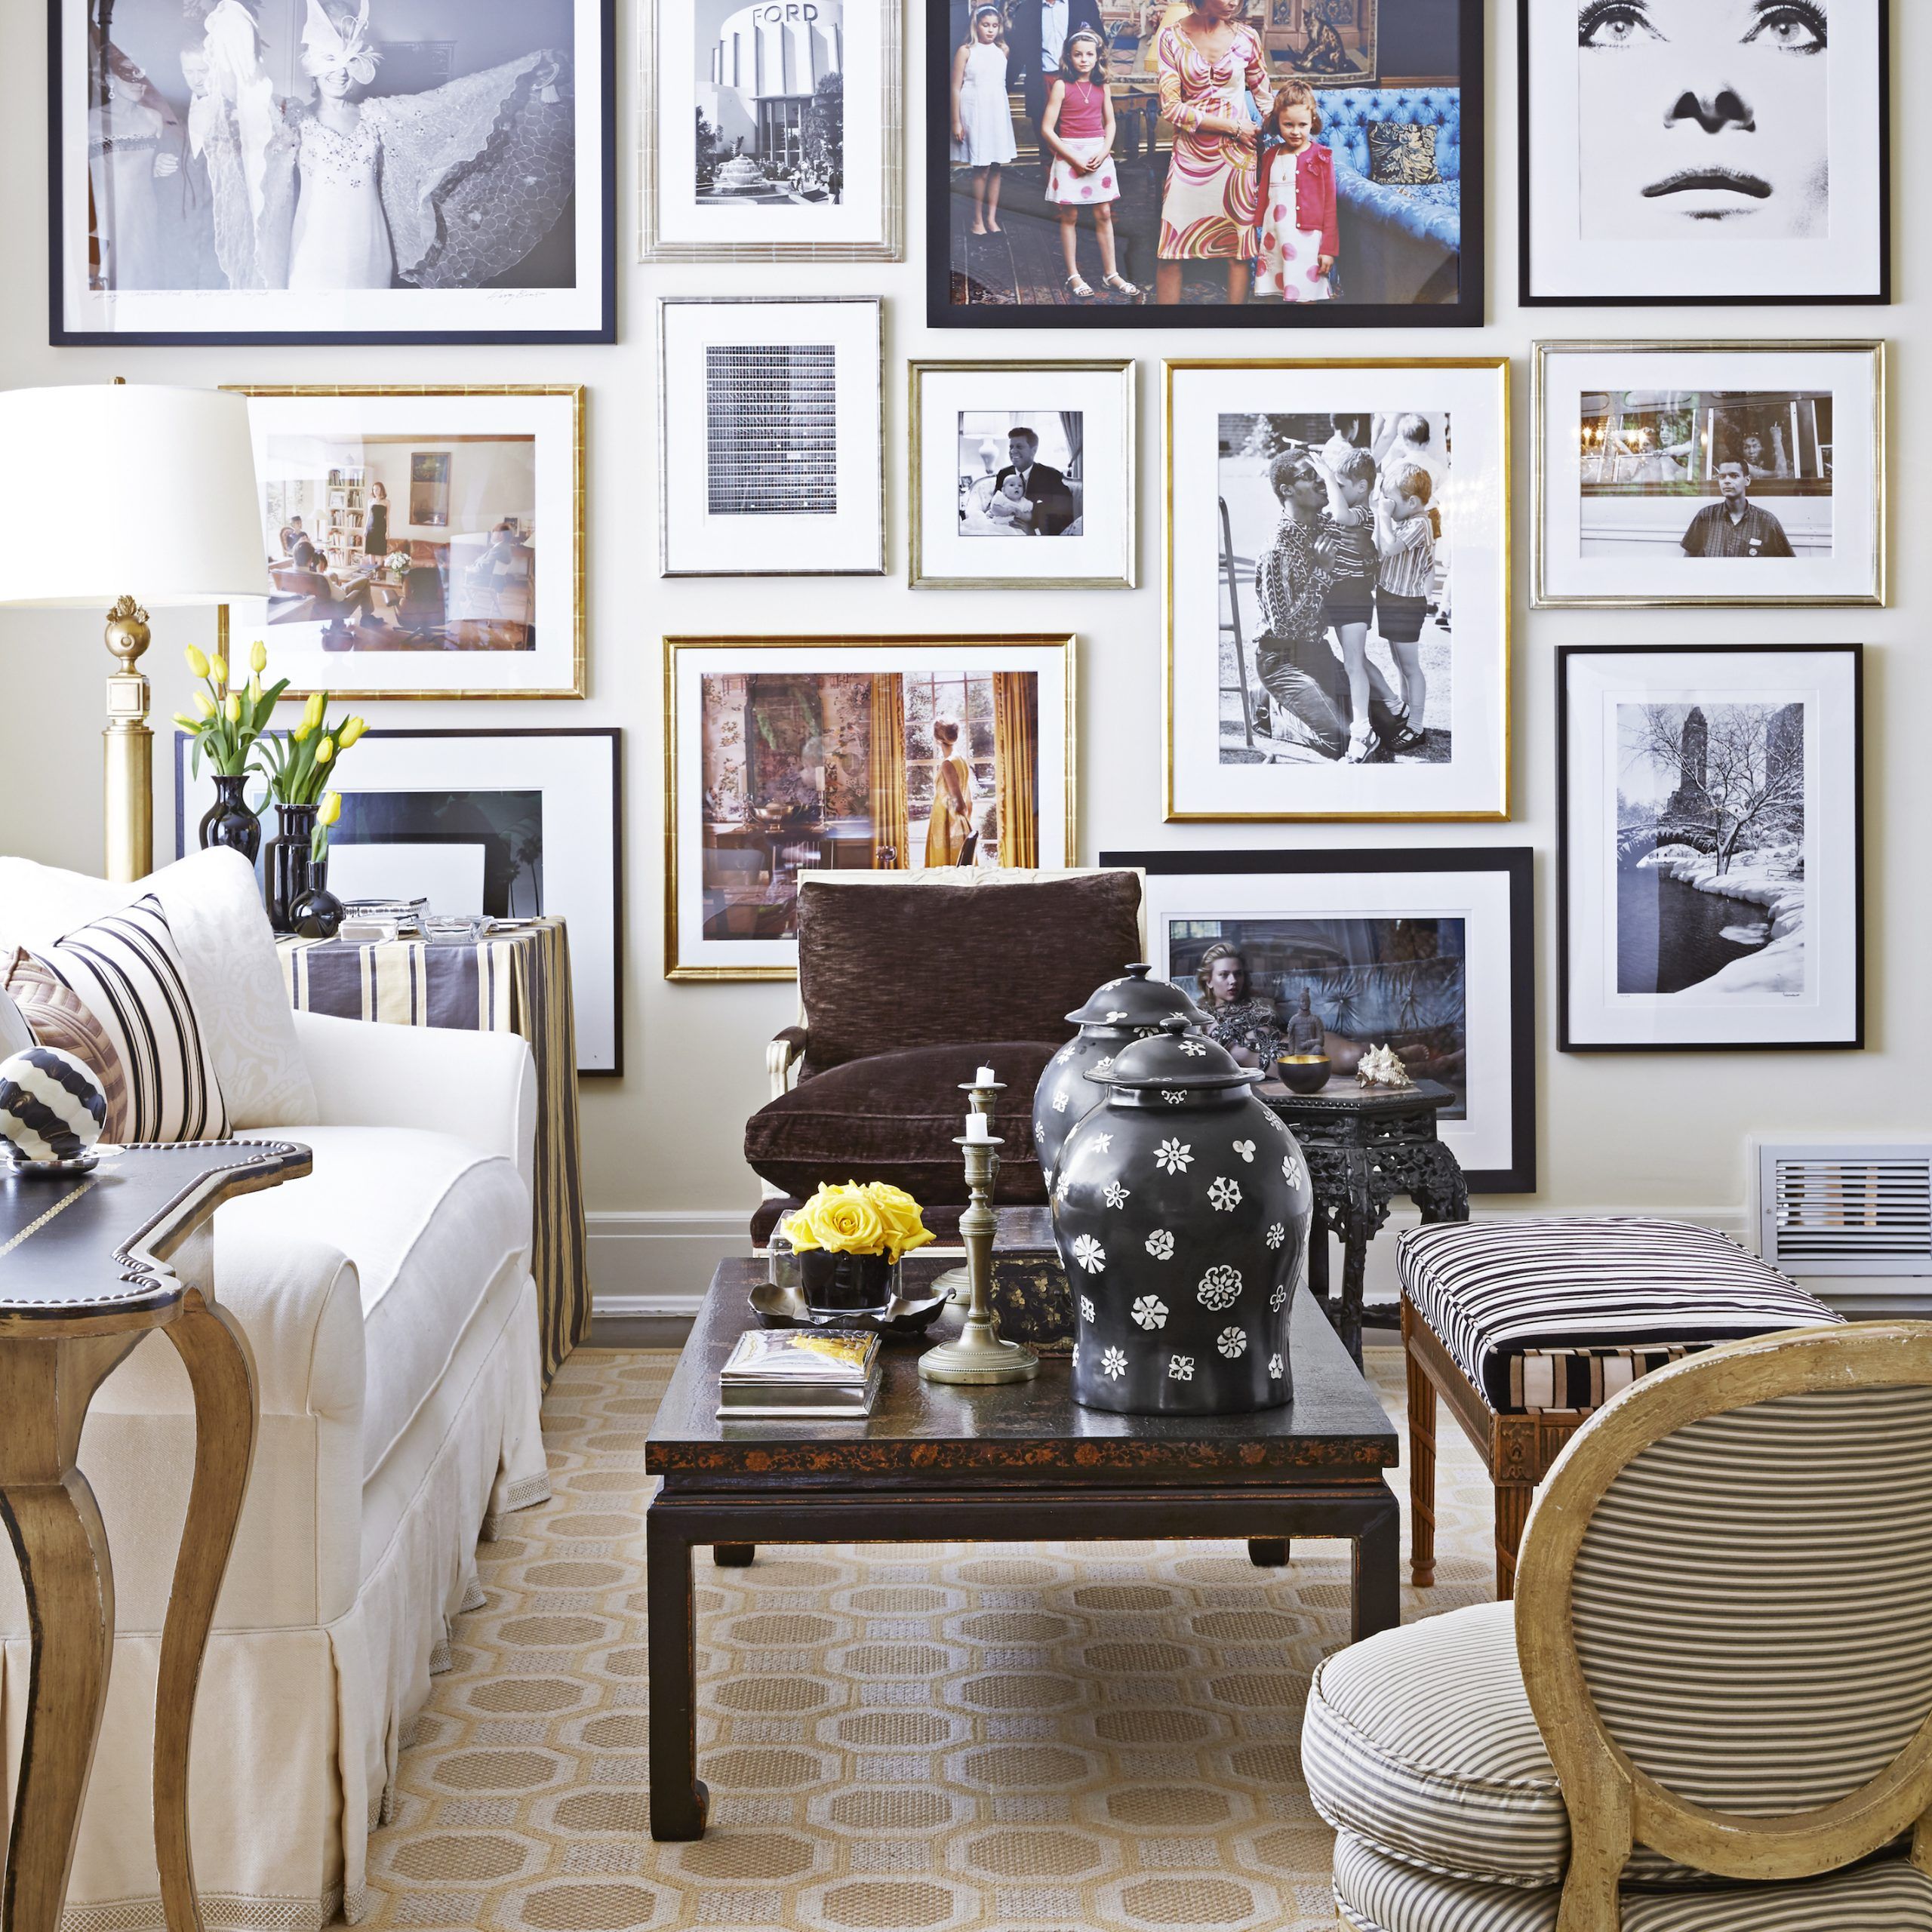 Gallery Wall Ideas – Ways To Display Art With Regard To Most Recently Released Array Wall Art (View 4 of 20)